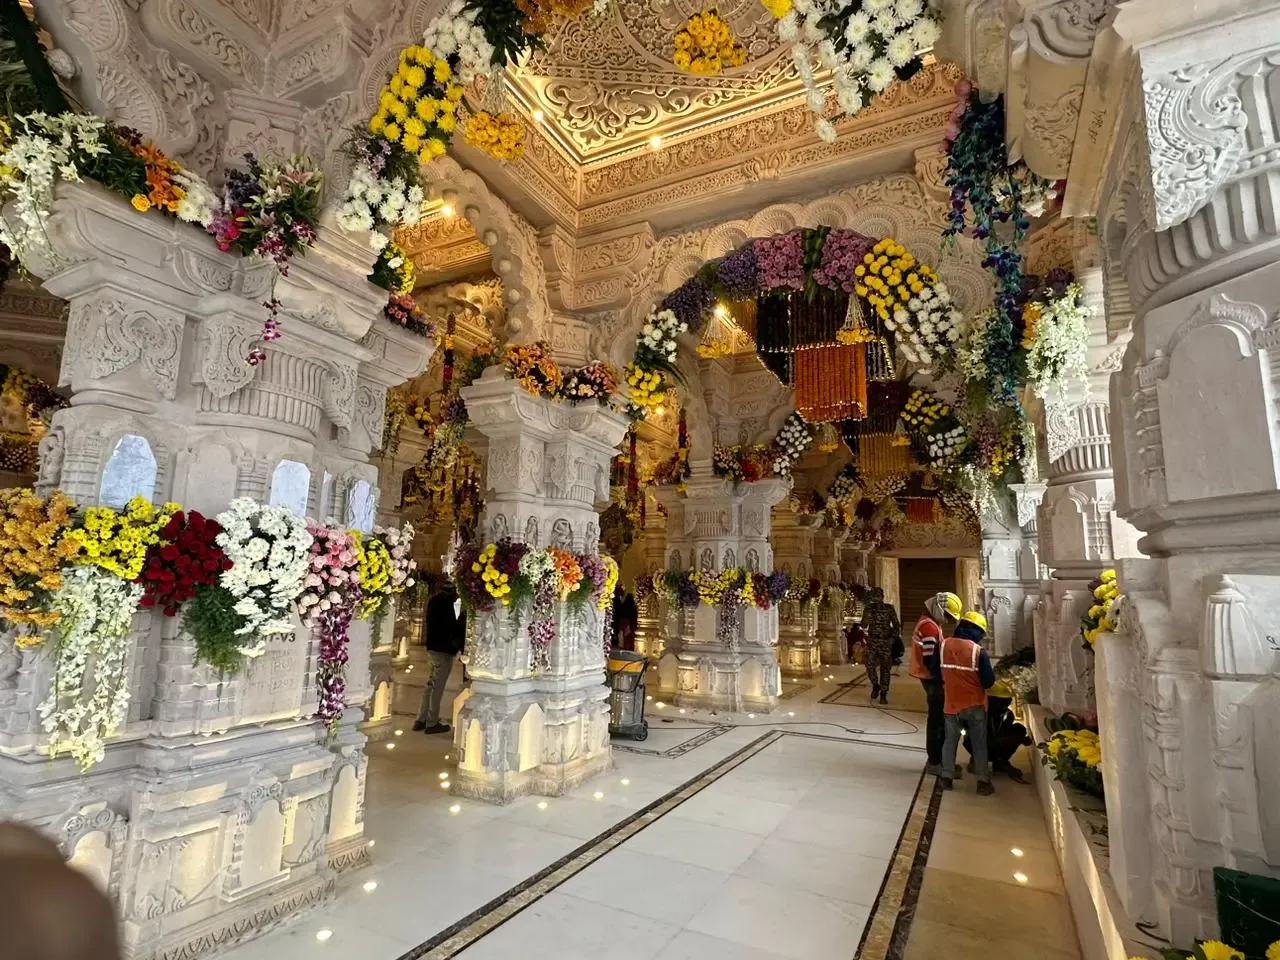 Inside of the Temple